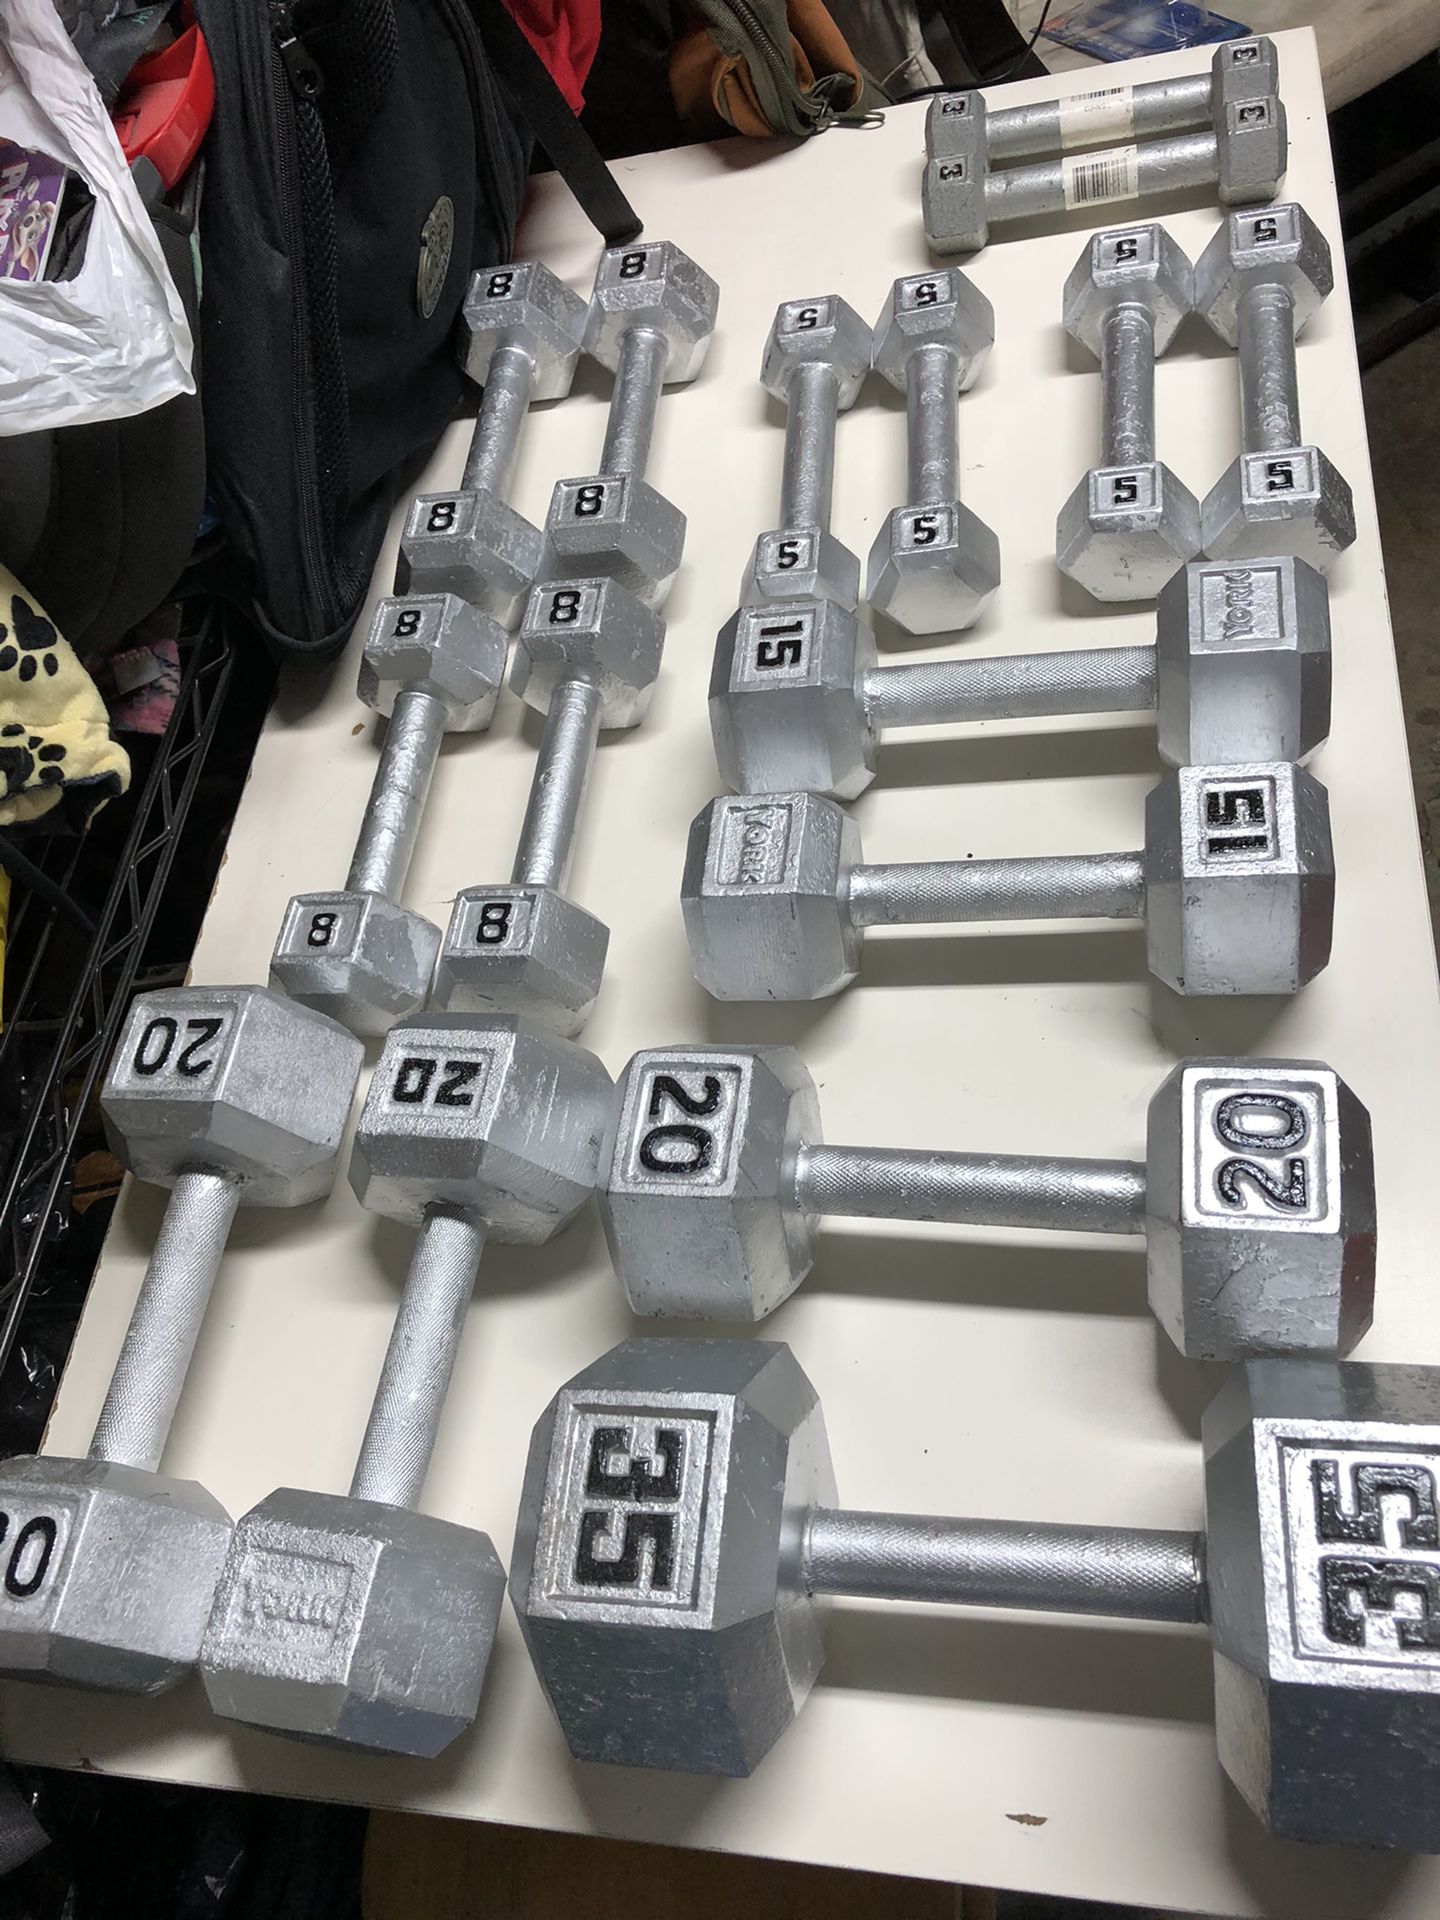 Dumbbells set 5lbs up to 35lbs in good condition .